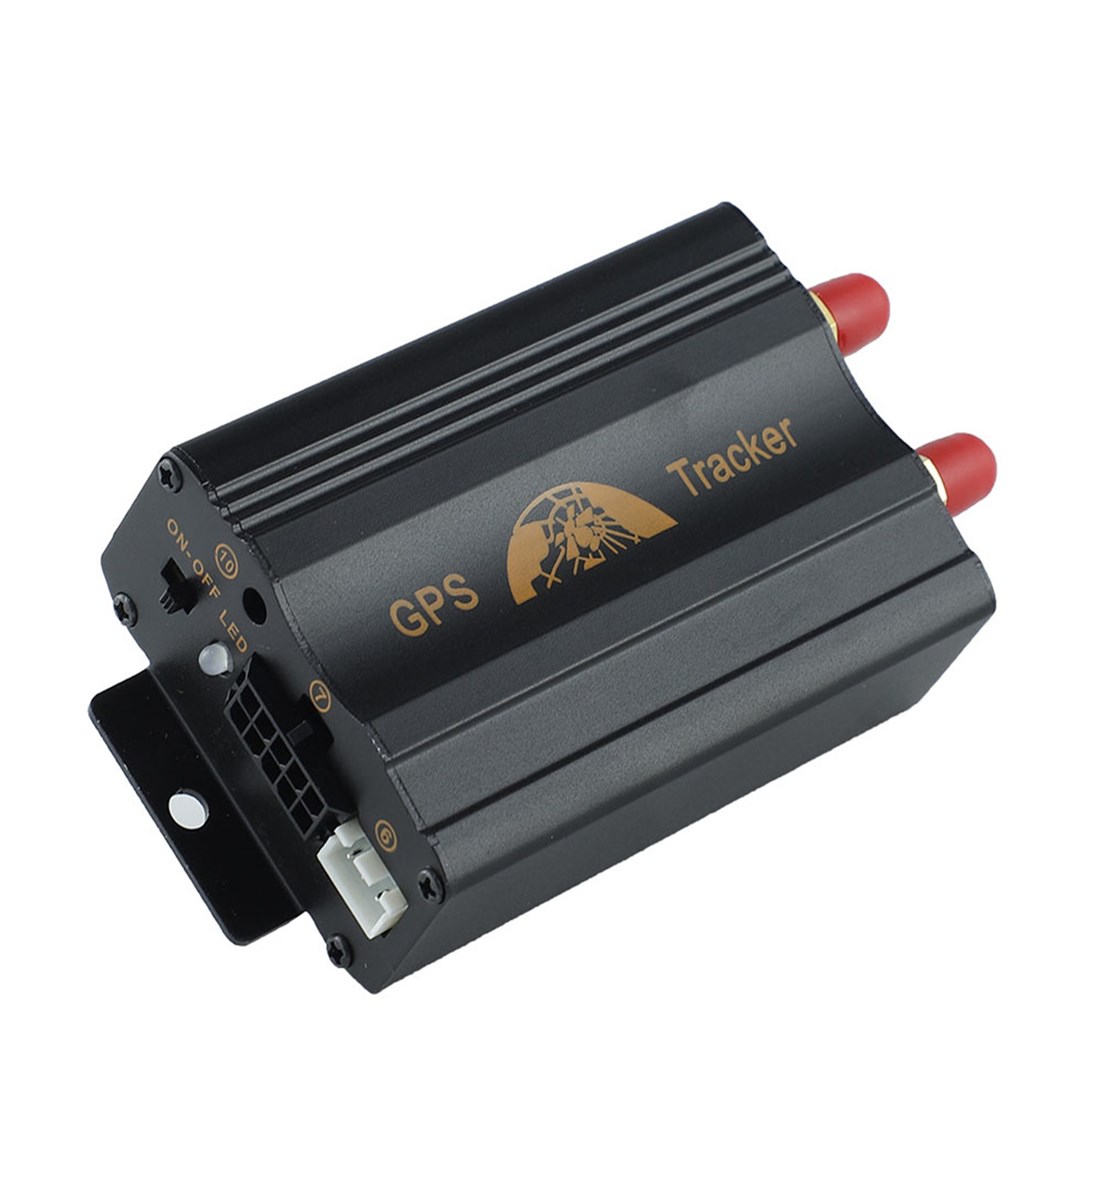 Coban GPS Tracker 103A with Android &IOS APP Waterproof Motorcycle/Car